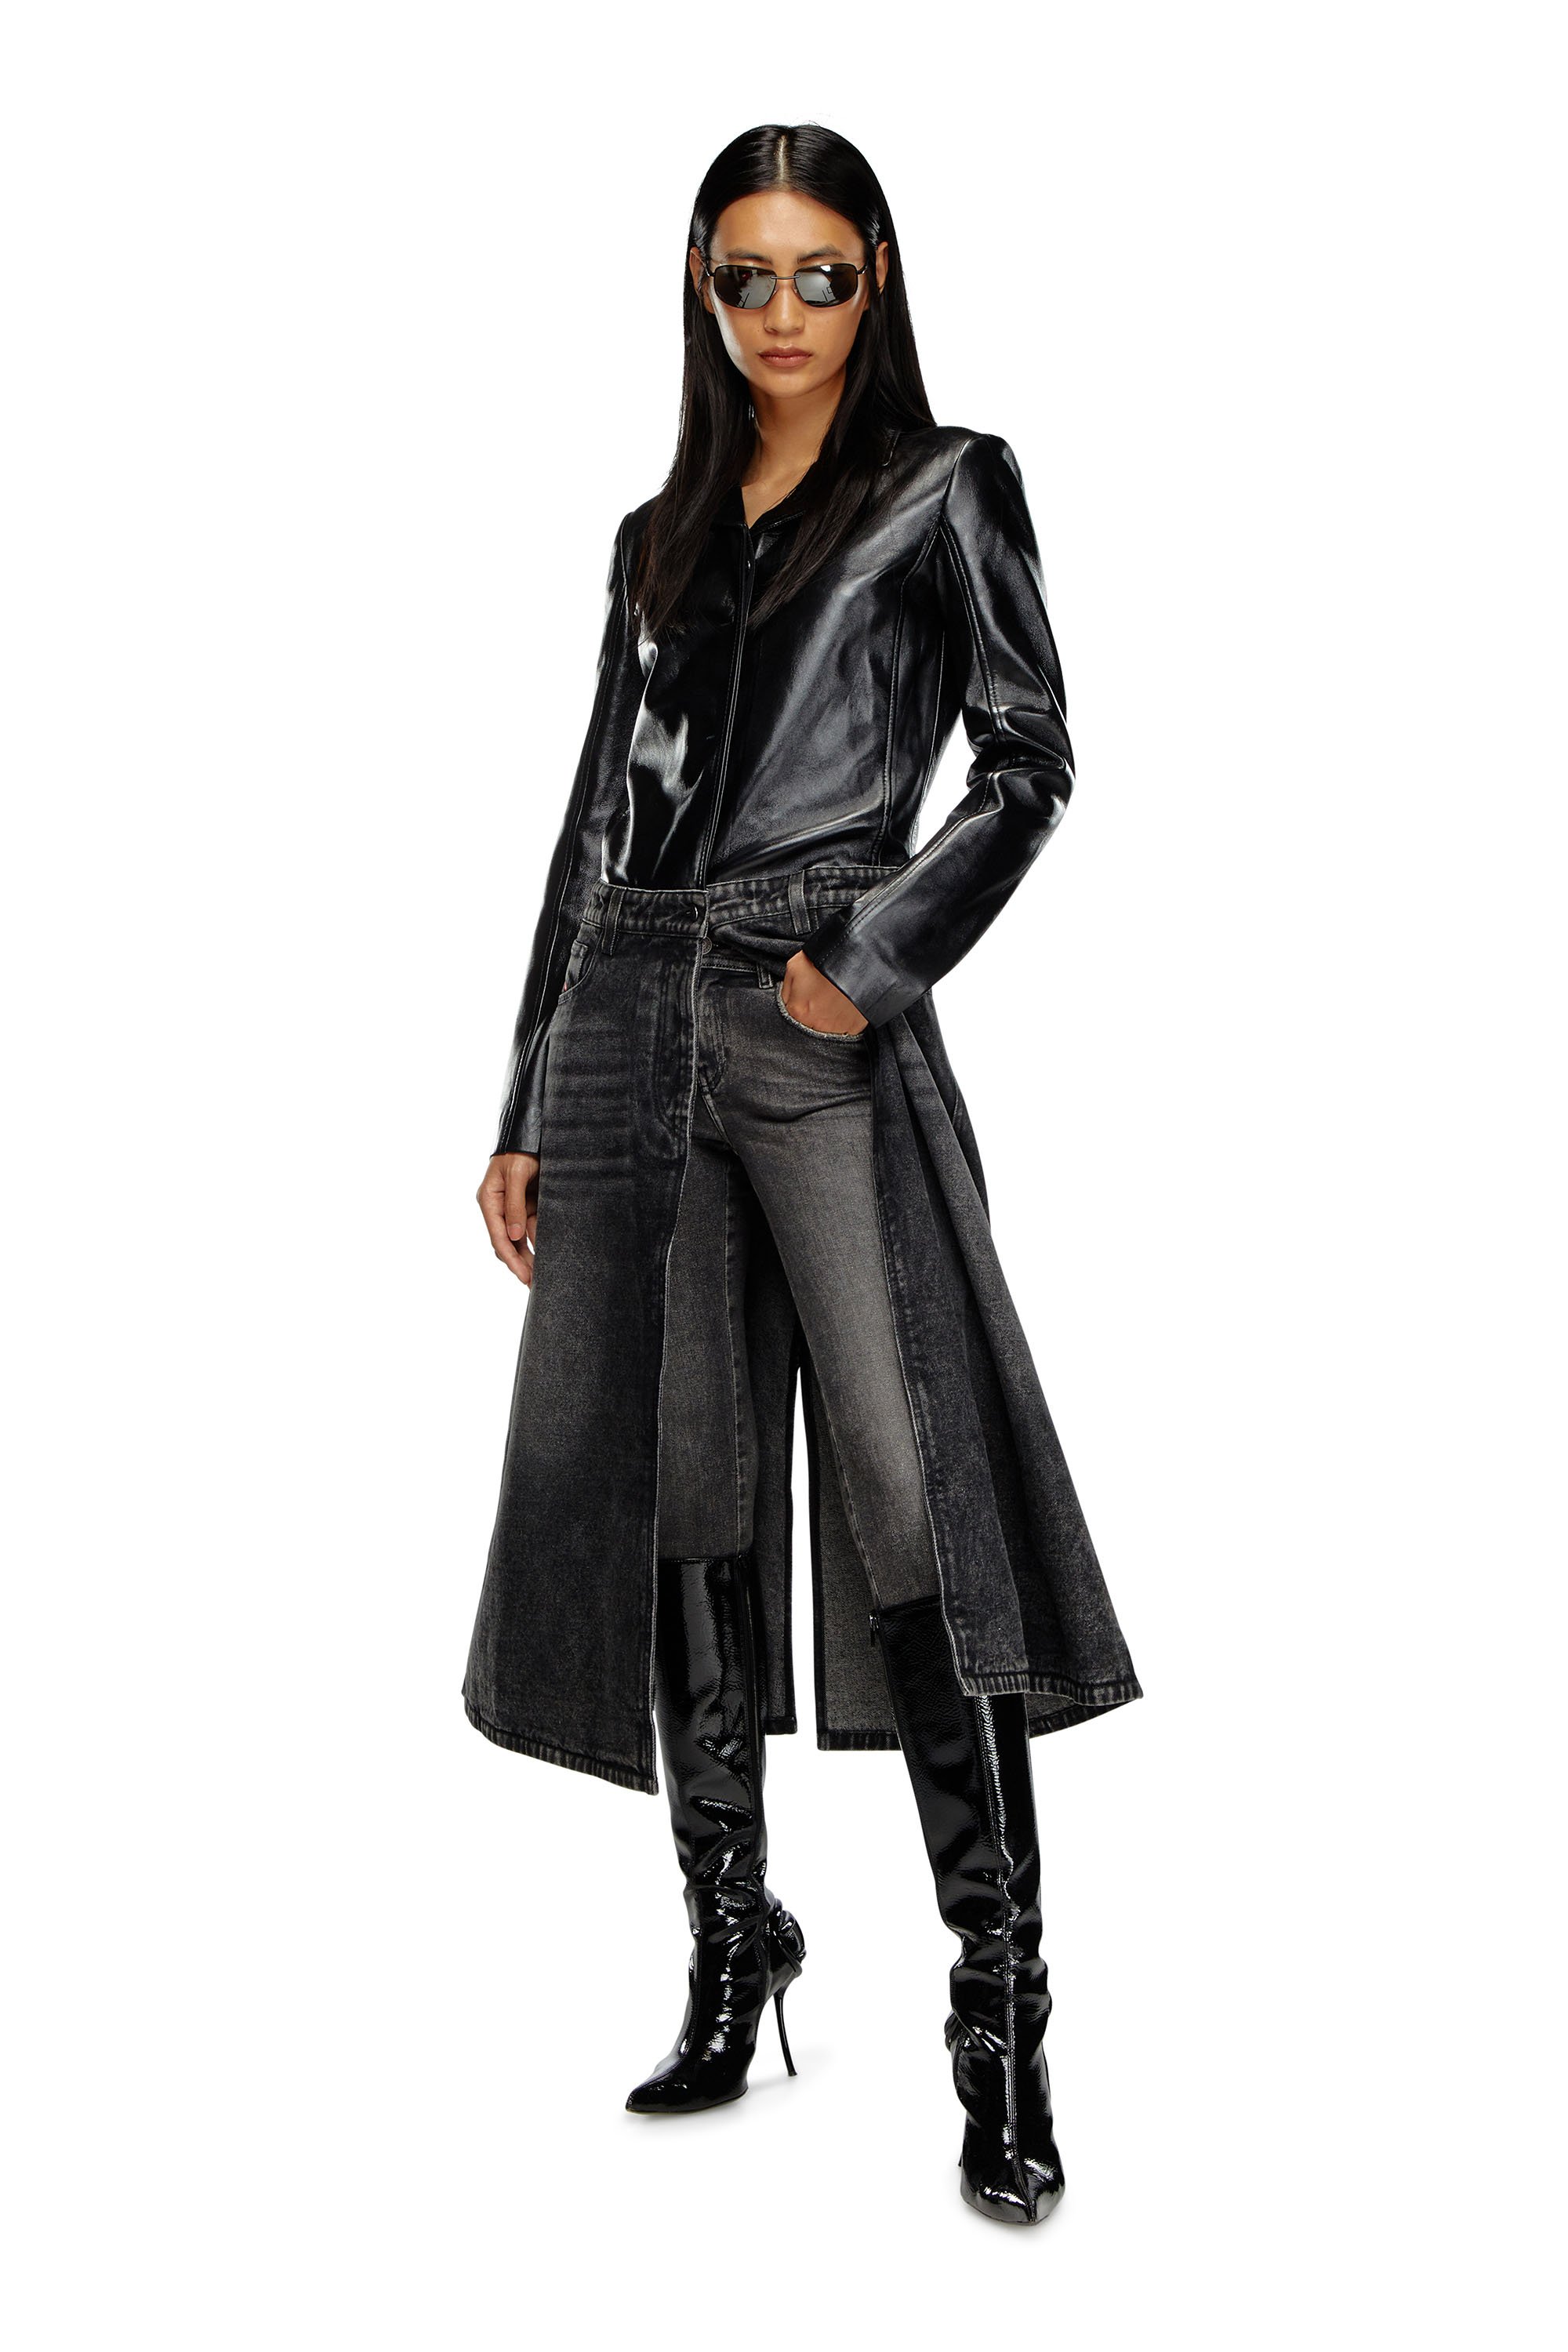 Diesel - L-ORY, Woman Hybrid coat in denim and leather in Black - Image 1